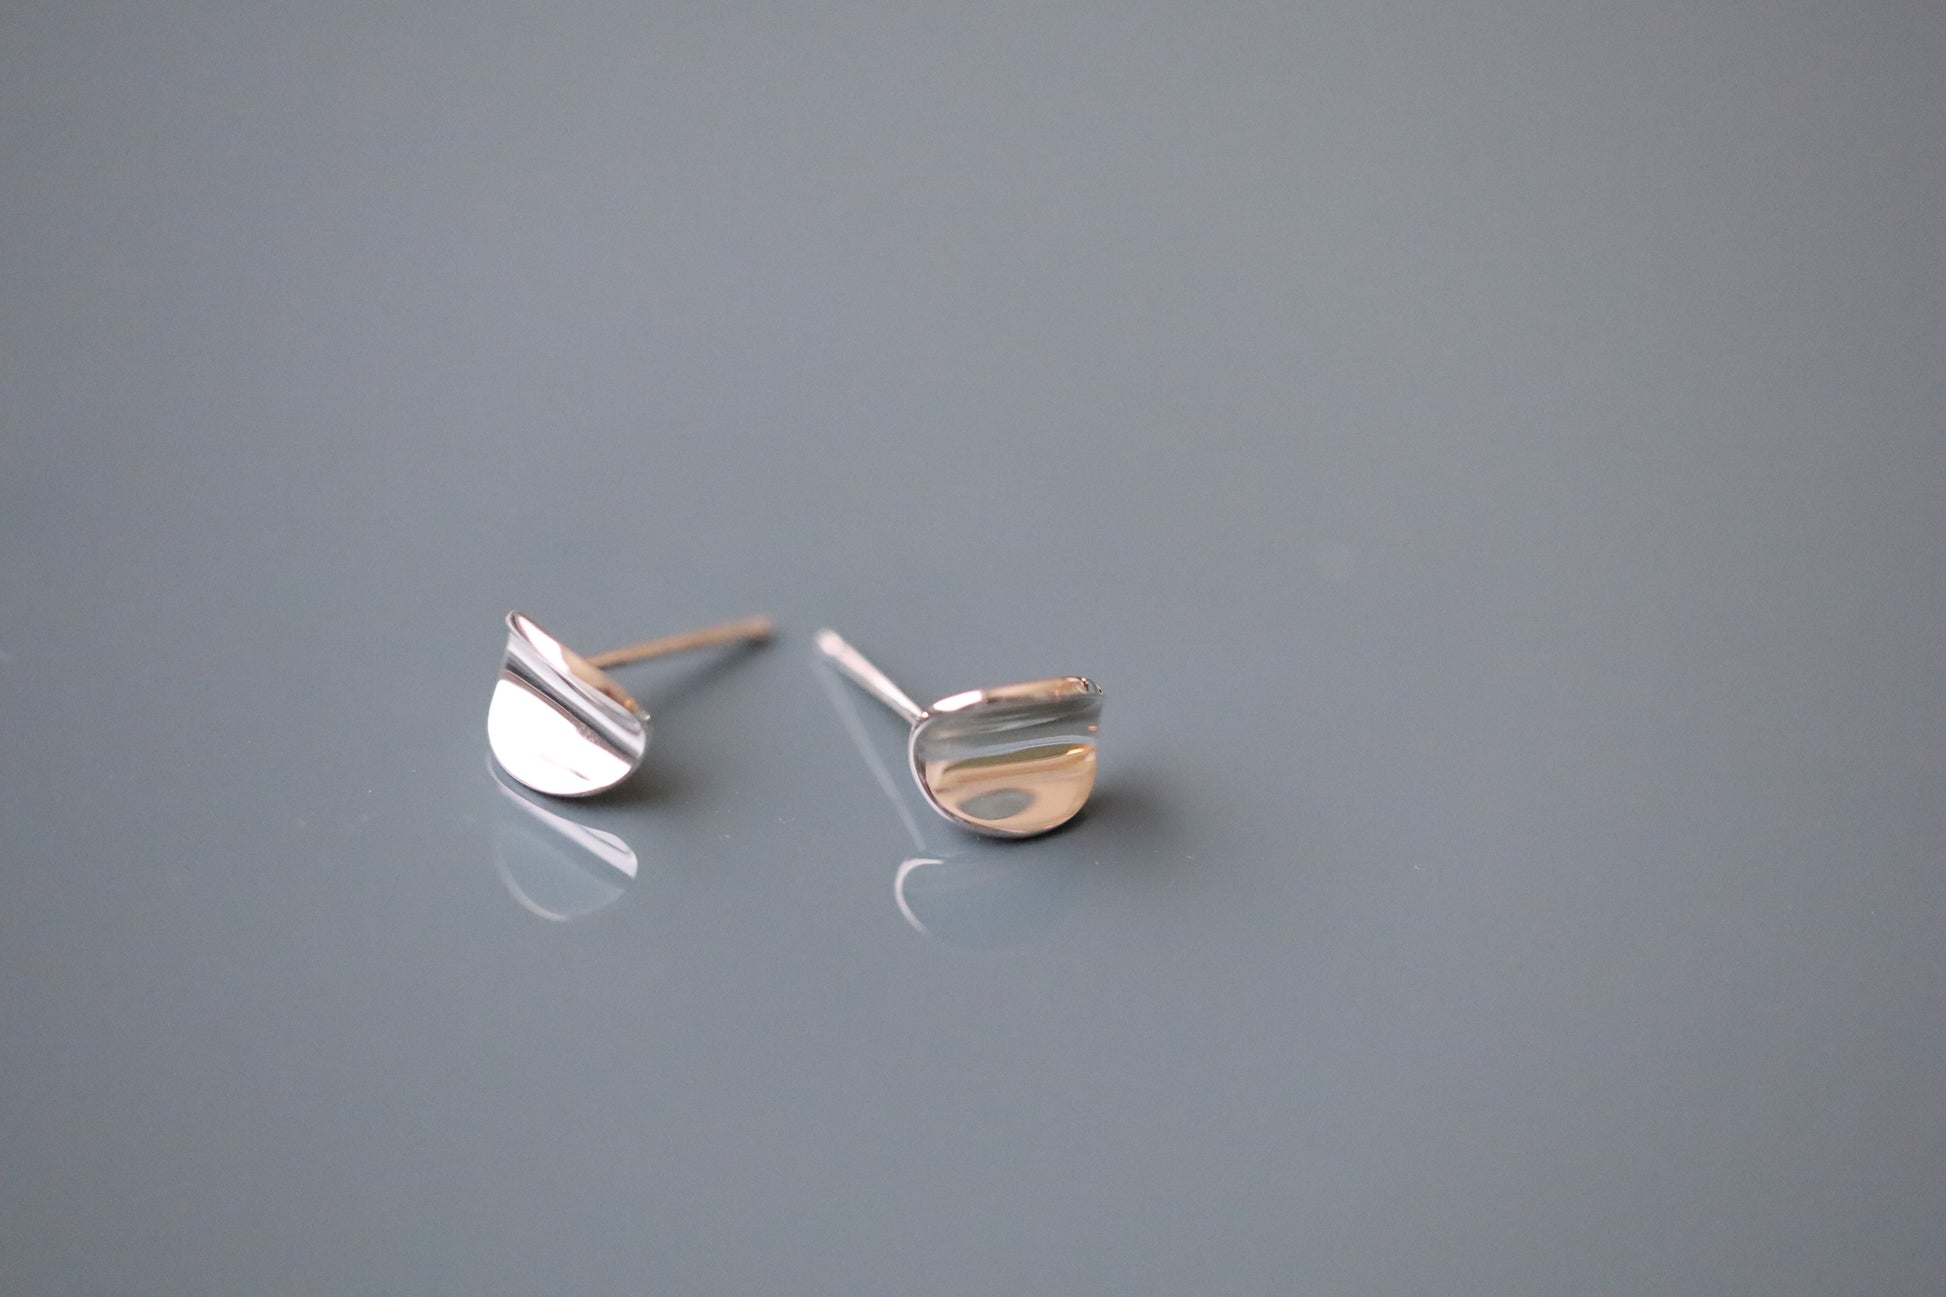 Curved organic shaped sterling silver earring studs.